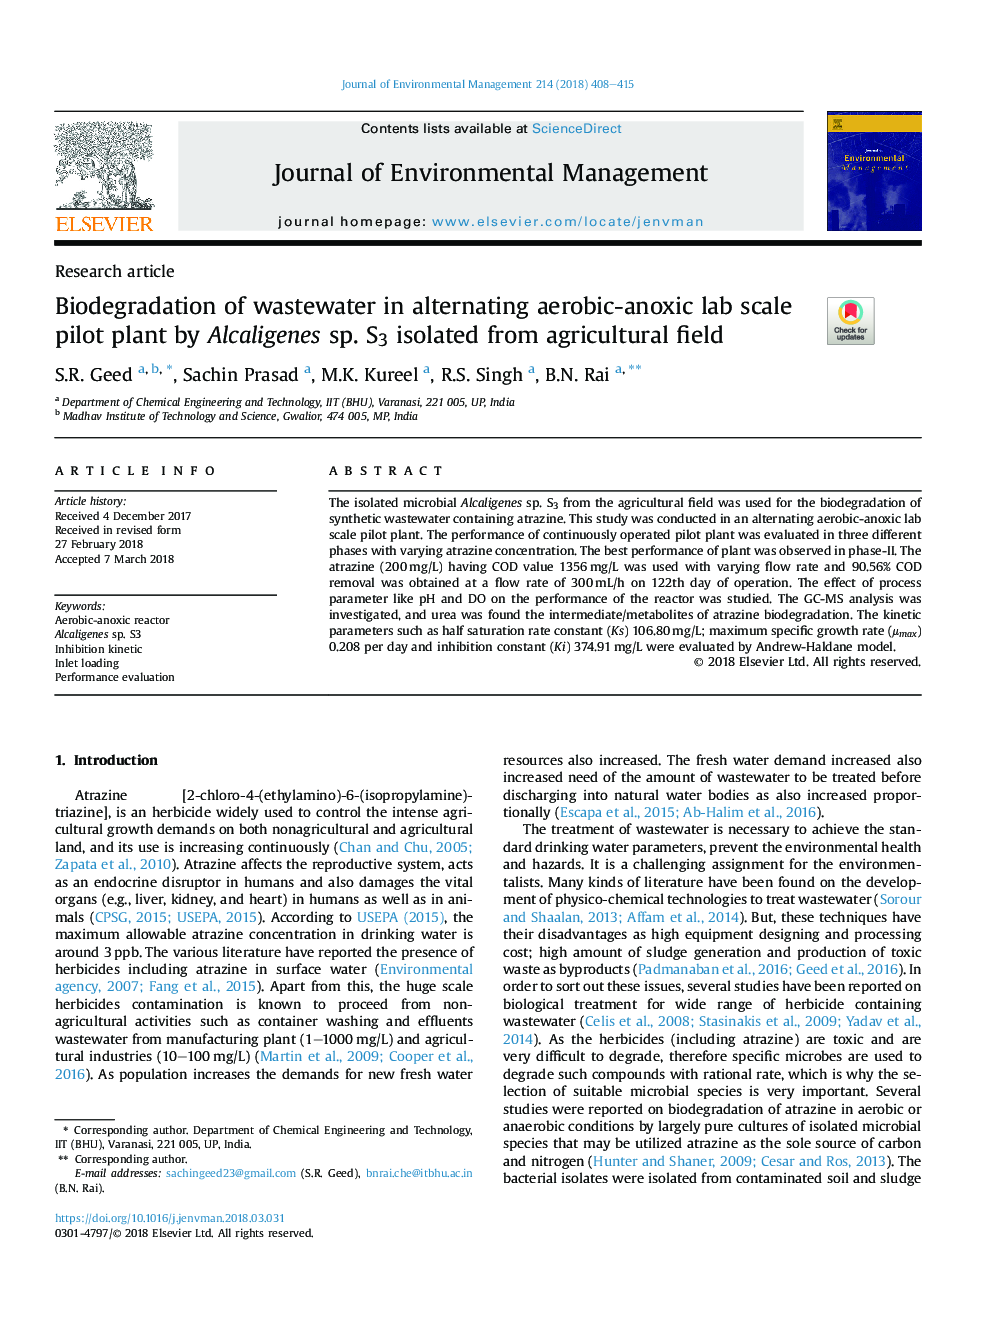 Biodegradation of wastewater in alternating aerobic-anoxic lab scale pilot plant by Alcaligenes sp. S3 isolated from agricultural field